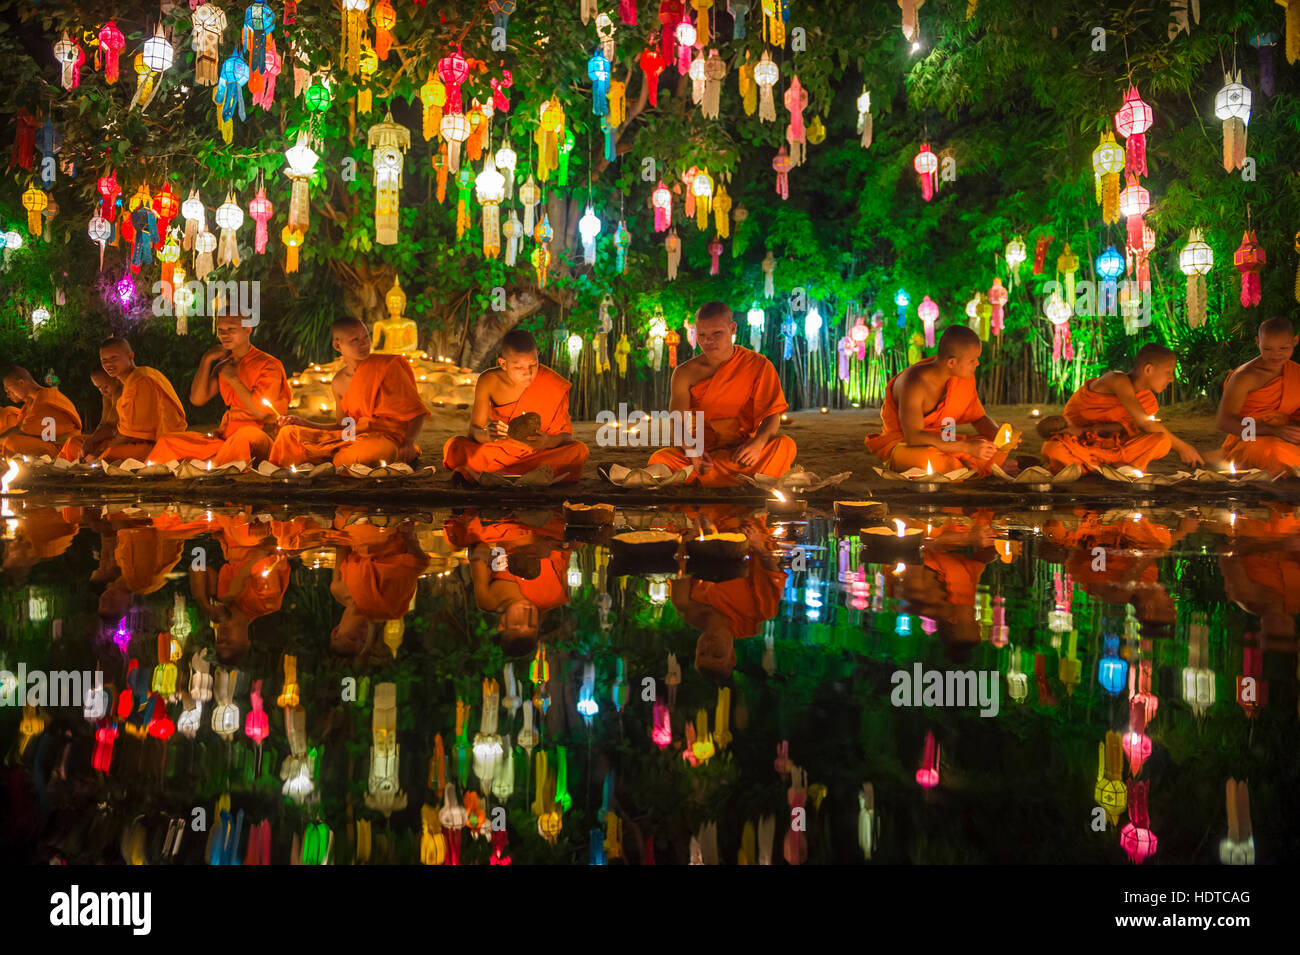 CHIANG MAI, THAILAND - NOVEMBER 06, 2014: Young Buddhist monks sit meditating at a festival of lights loi krathong ceremony. Stock Photo